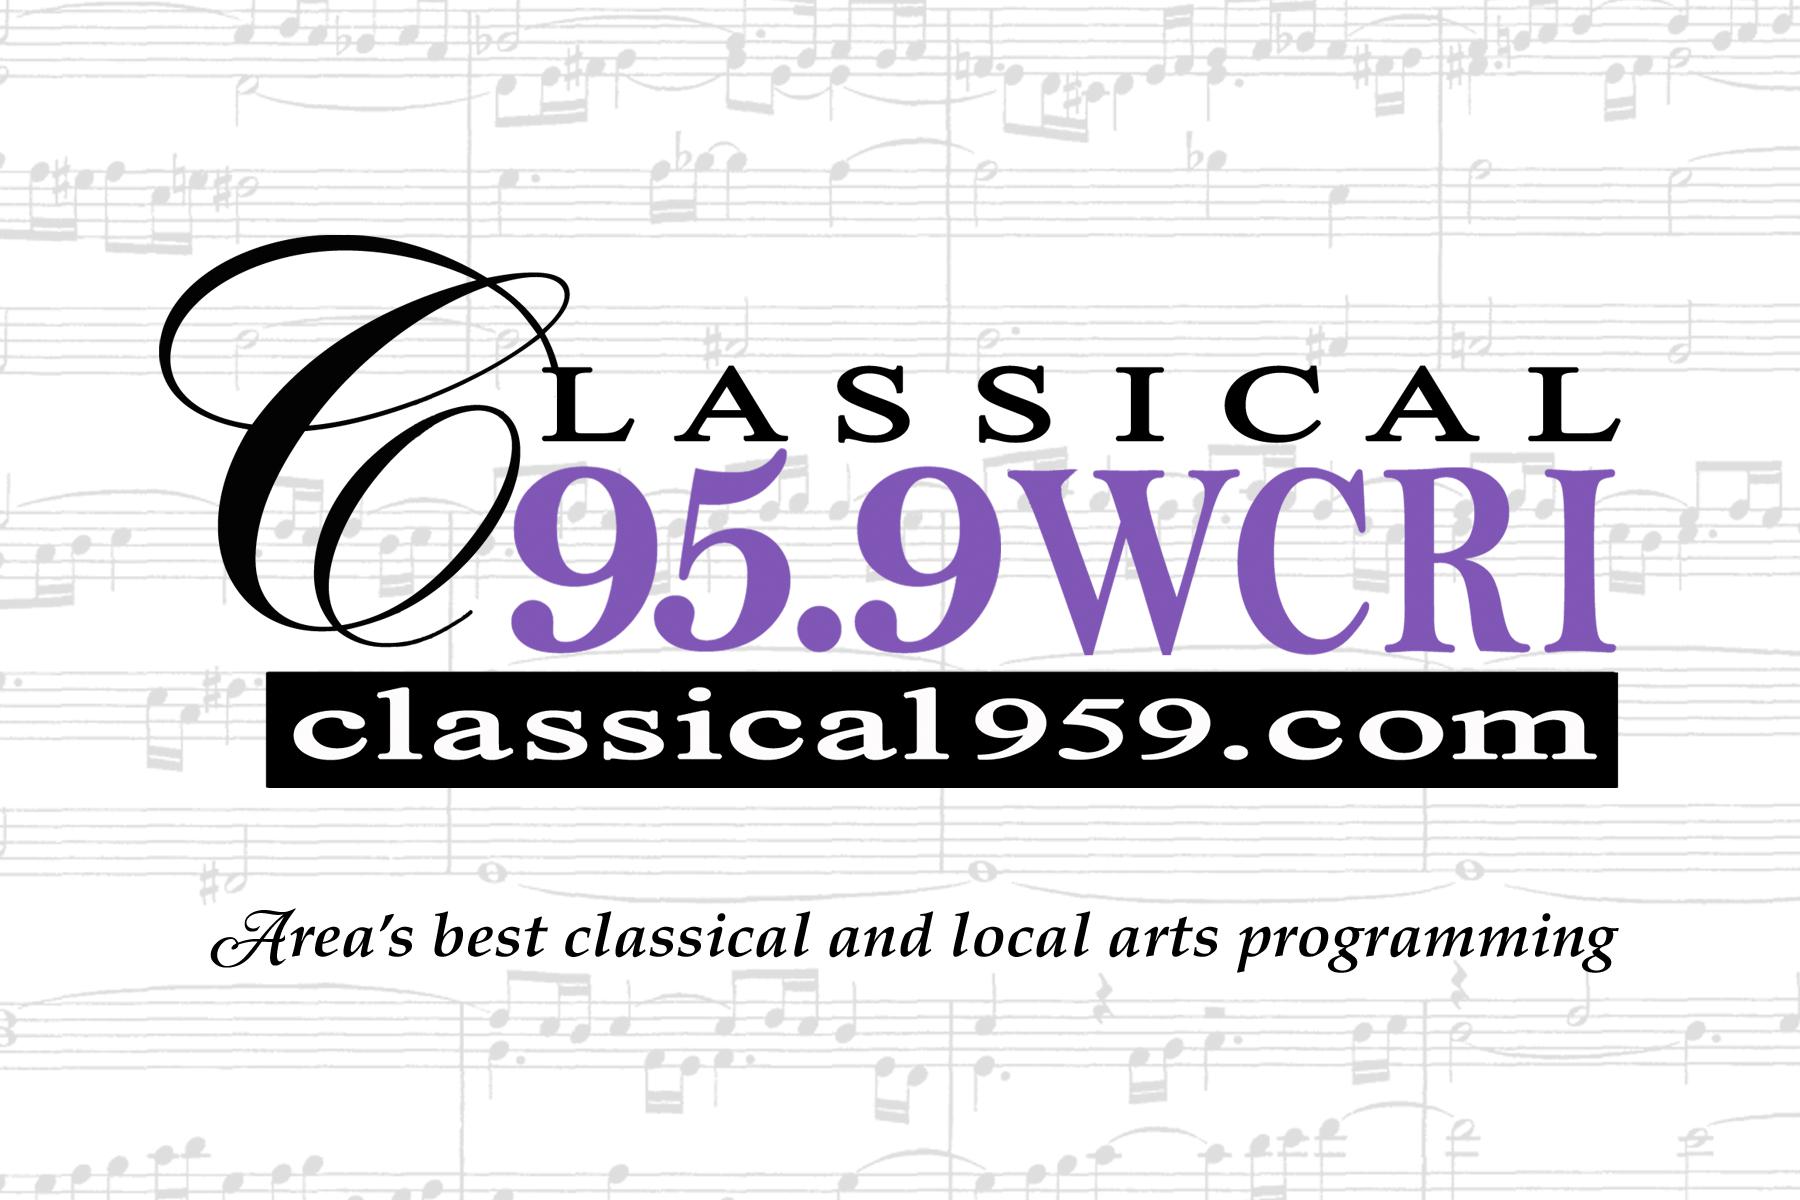 11-19-17   NMF and 50 Years of Highlights -  WCRI’s Festival Series featuring The Newport Music Festival